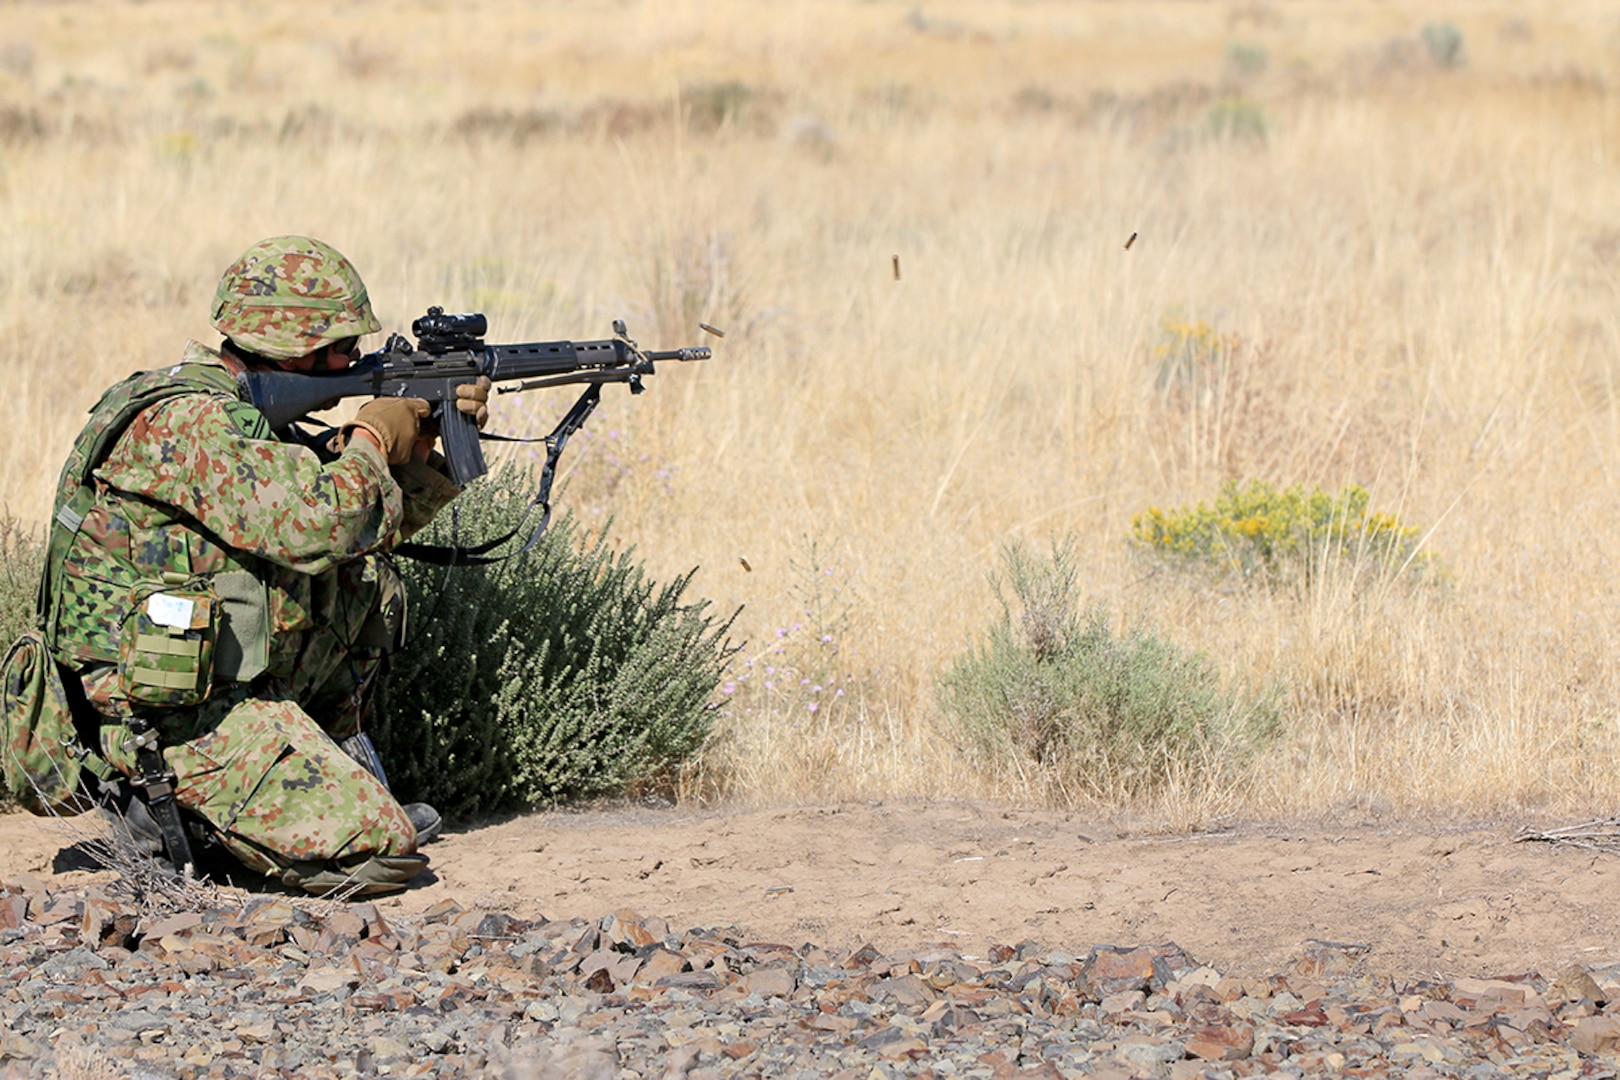 A soldier from the Japan Ground Self-Defense Force opens fire on his target in a live fire exercise during Rising Thunder, Sep. 1, at the Yakima Training Center in Yakima, Washington.